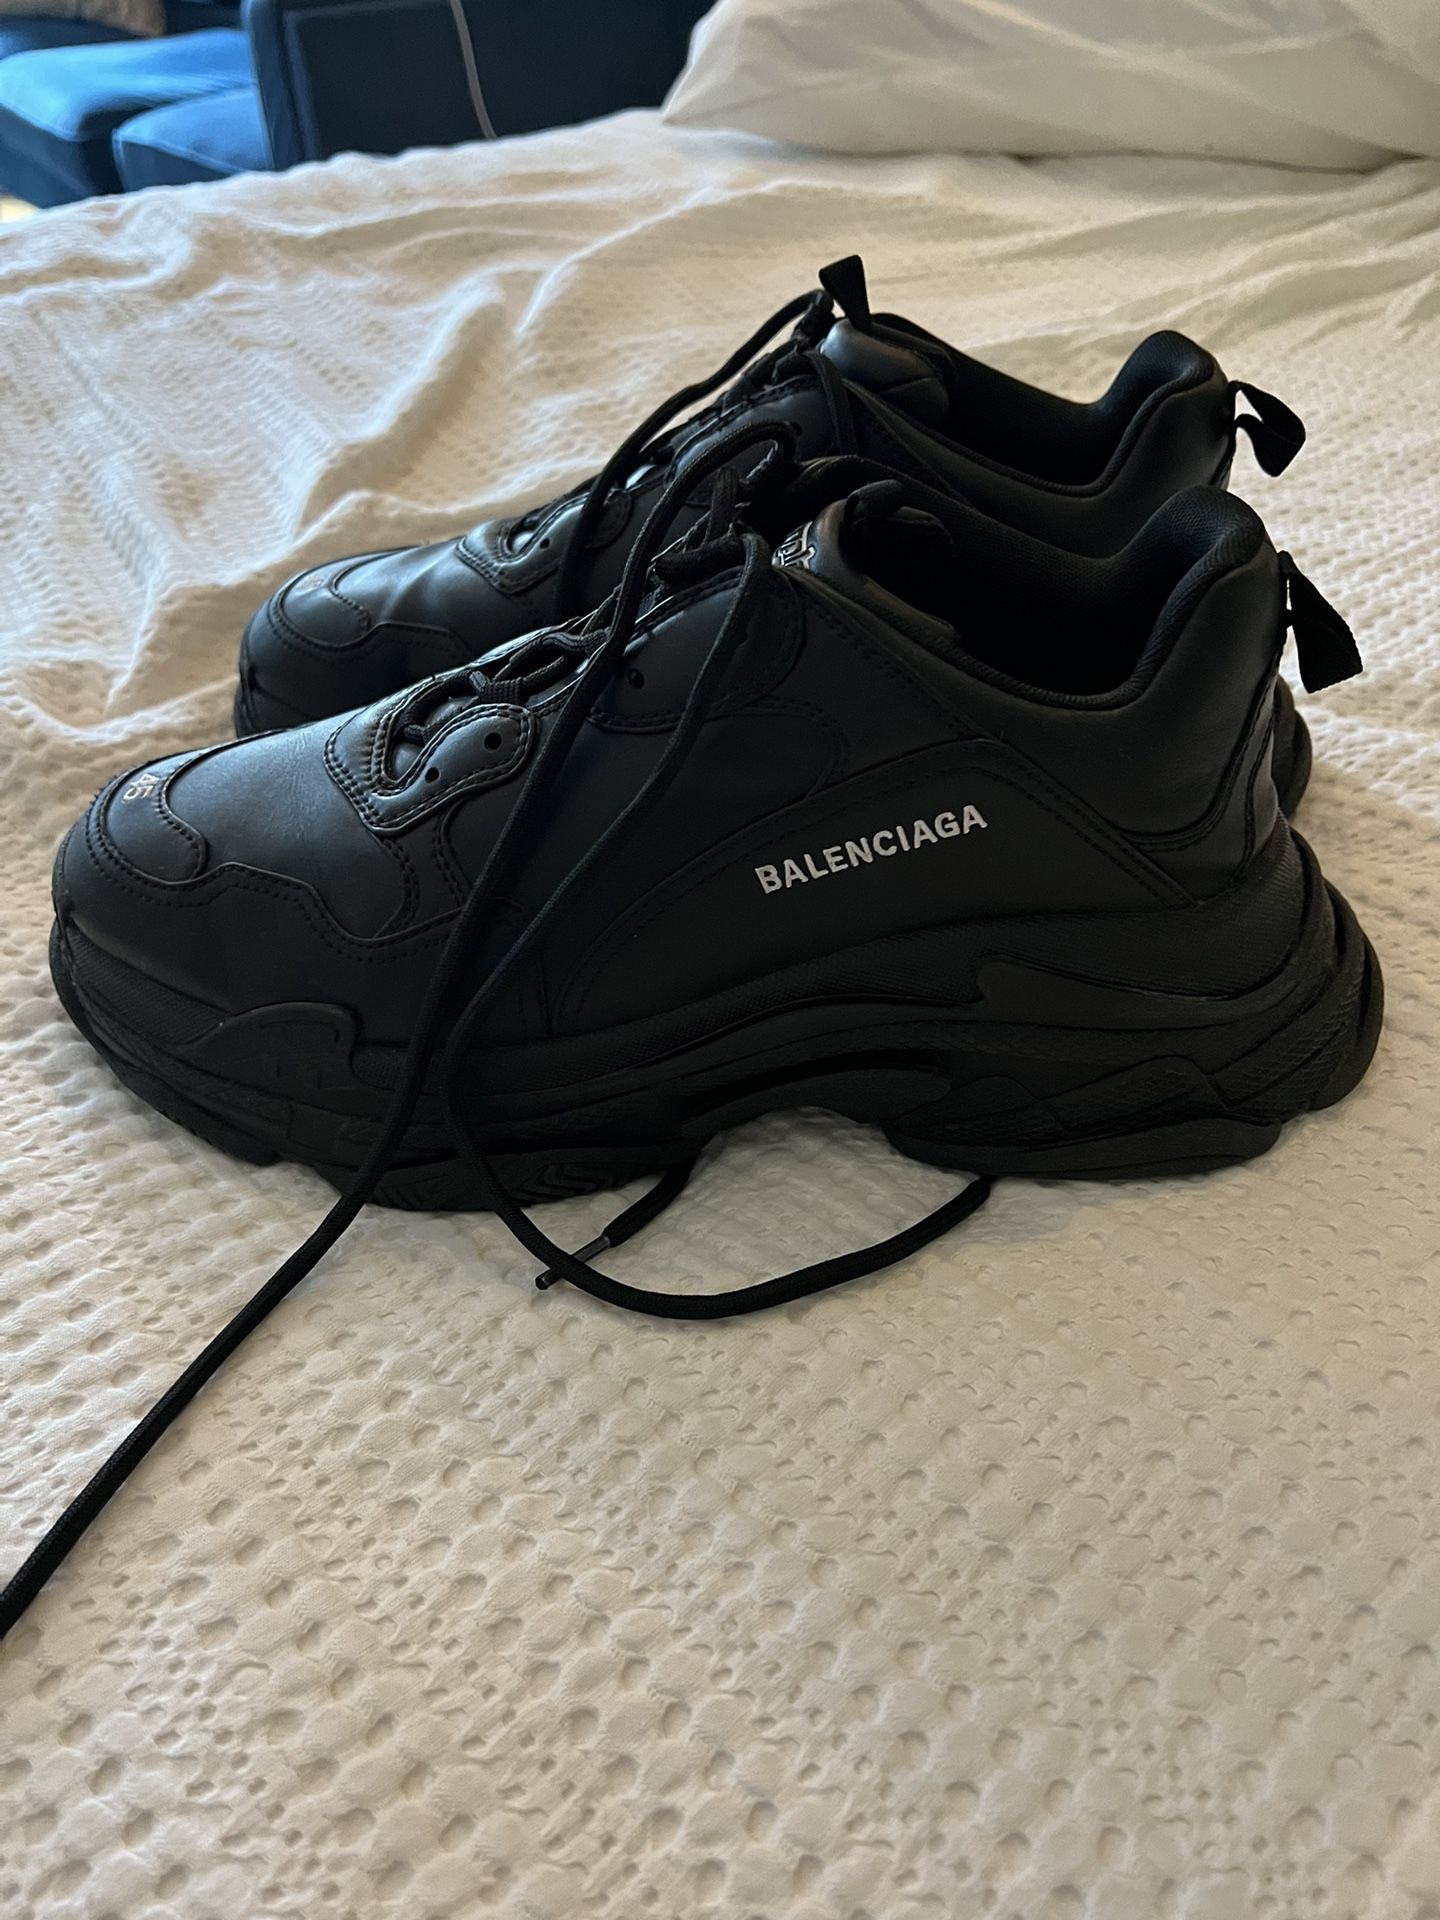 Mens Balenciaga Triple S Sneakers (Gently Used) Sale in New York, NY - OfferUp